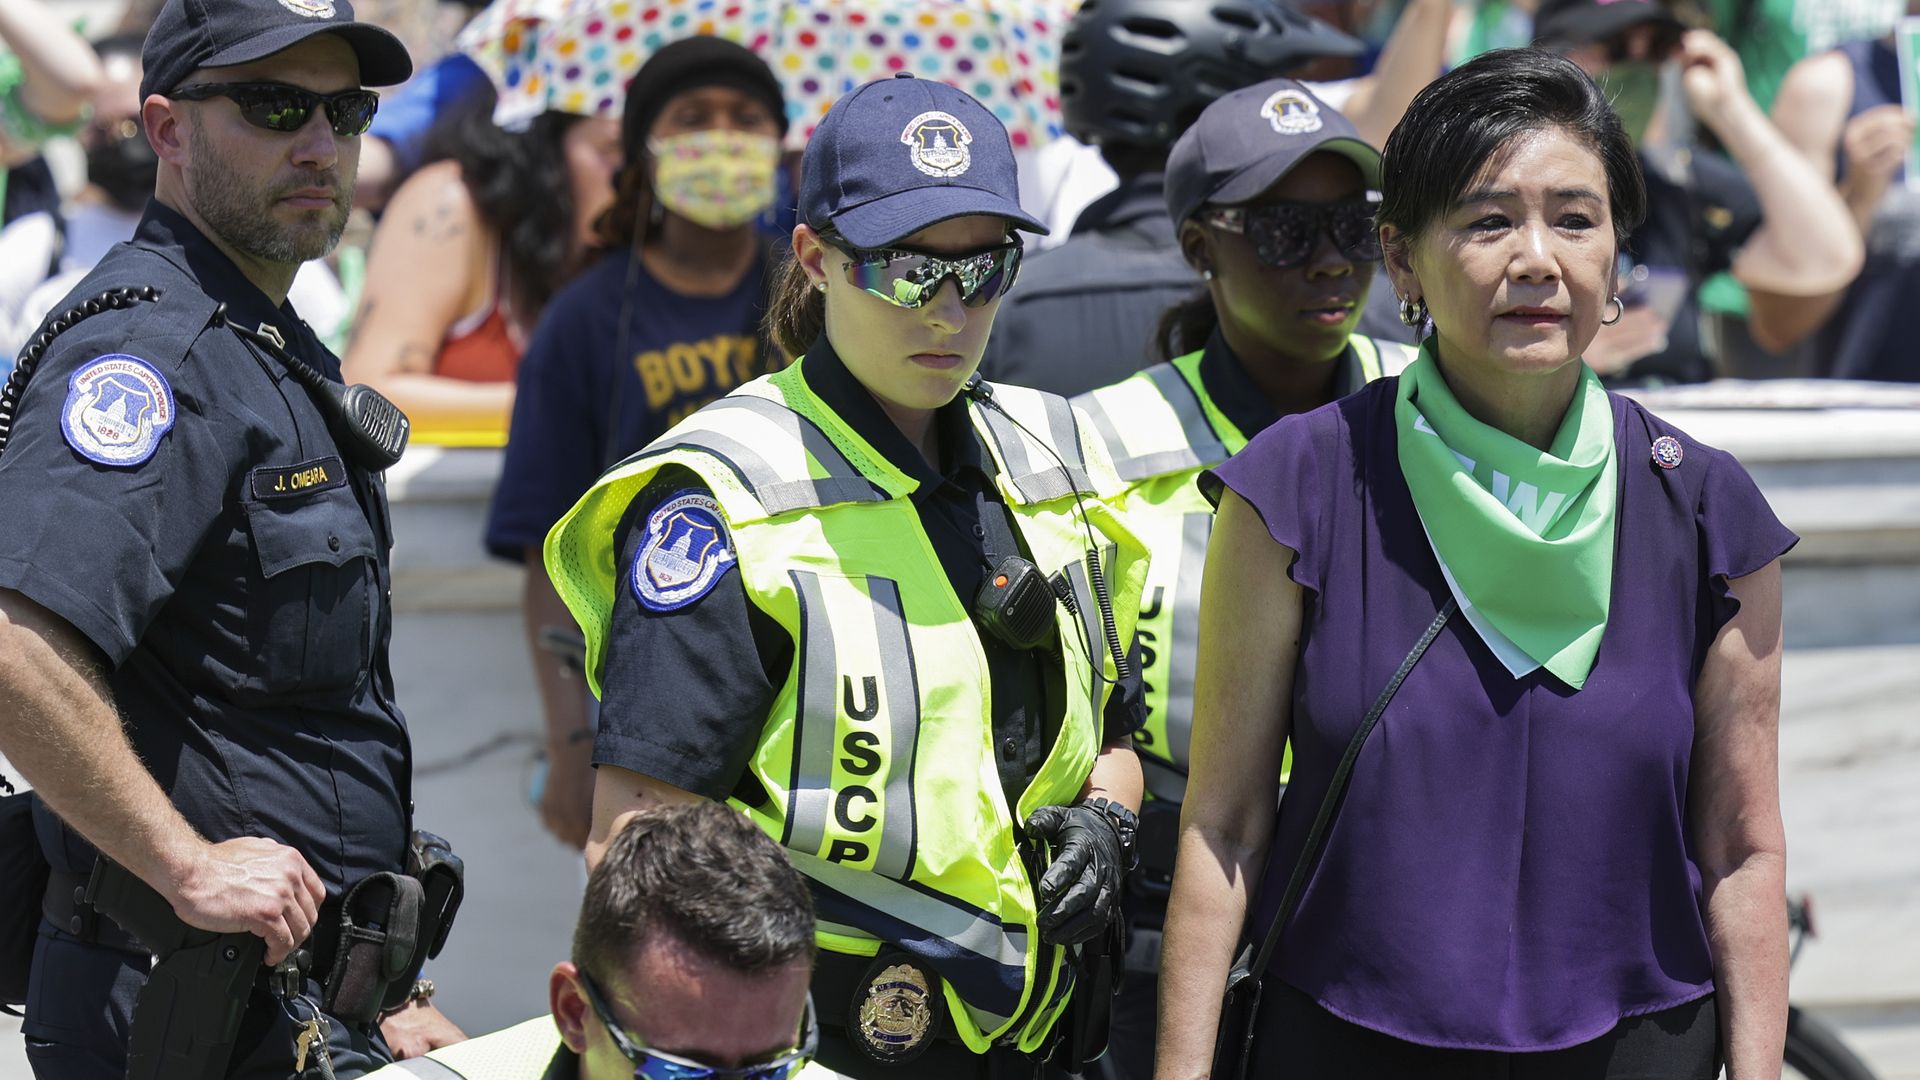 Judy Chu detained by Capitol Police